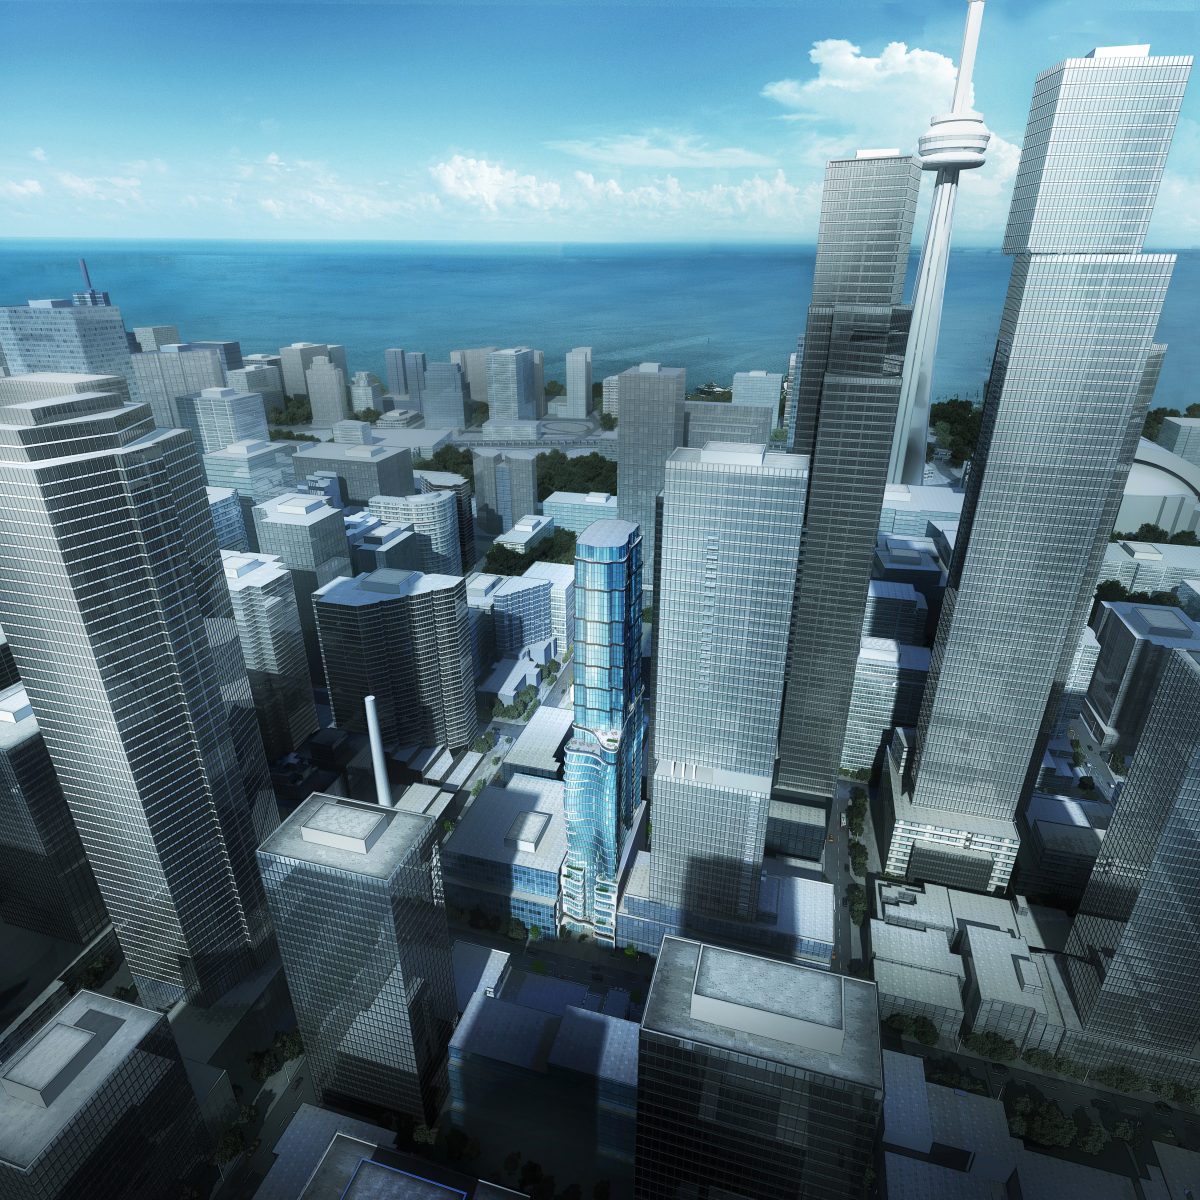 217 Adelaide West rendering of building exterior and surrounding city buildings.